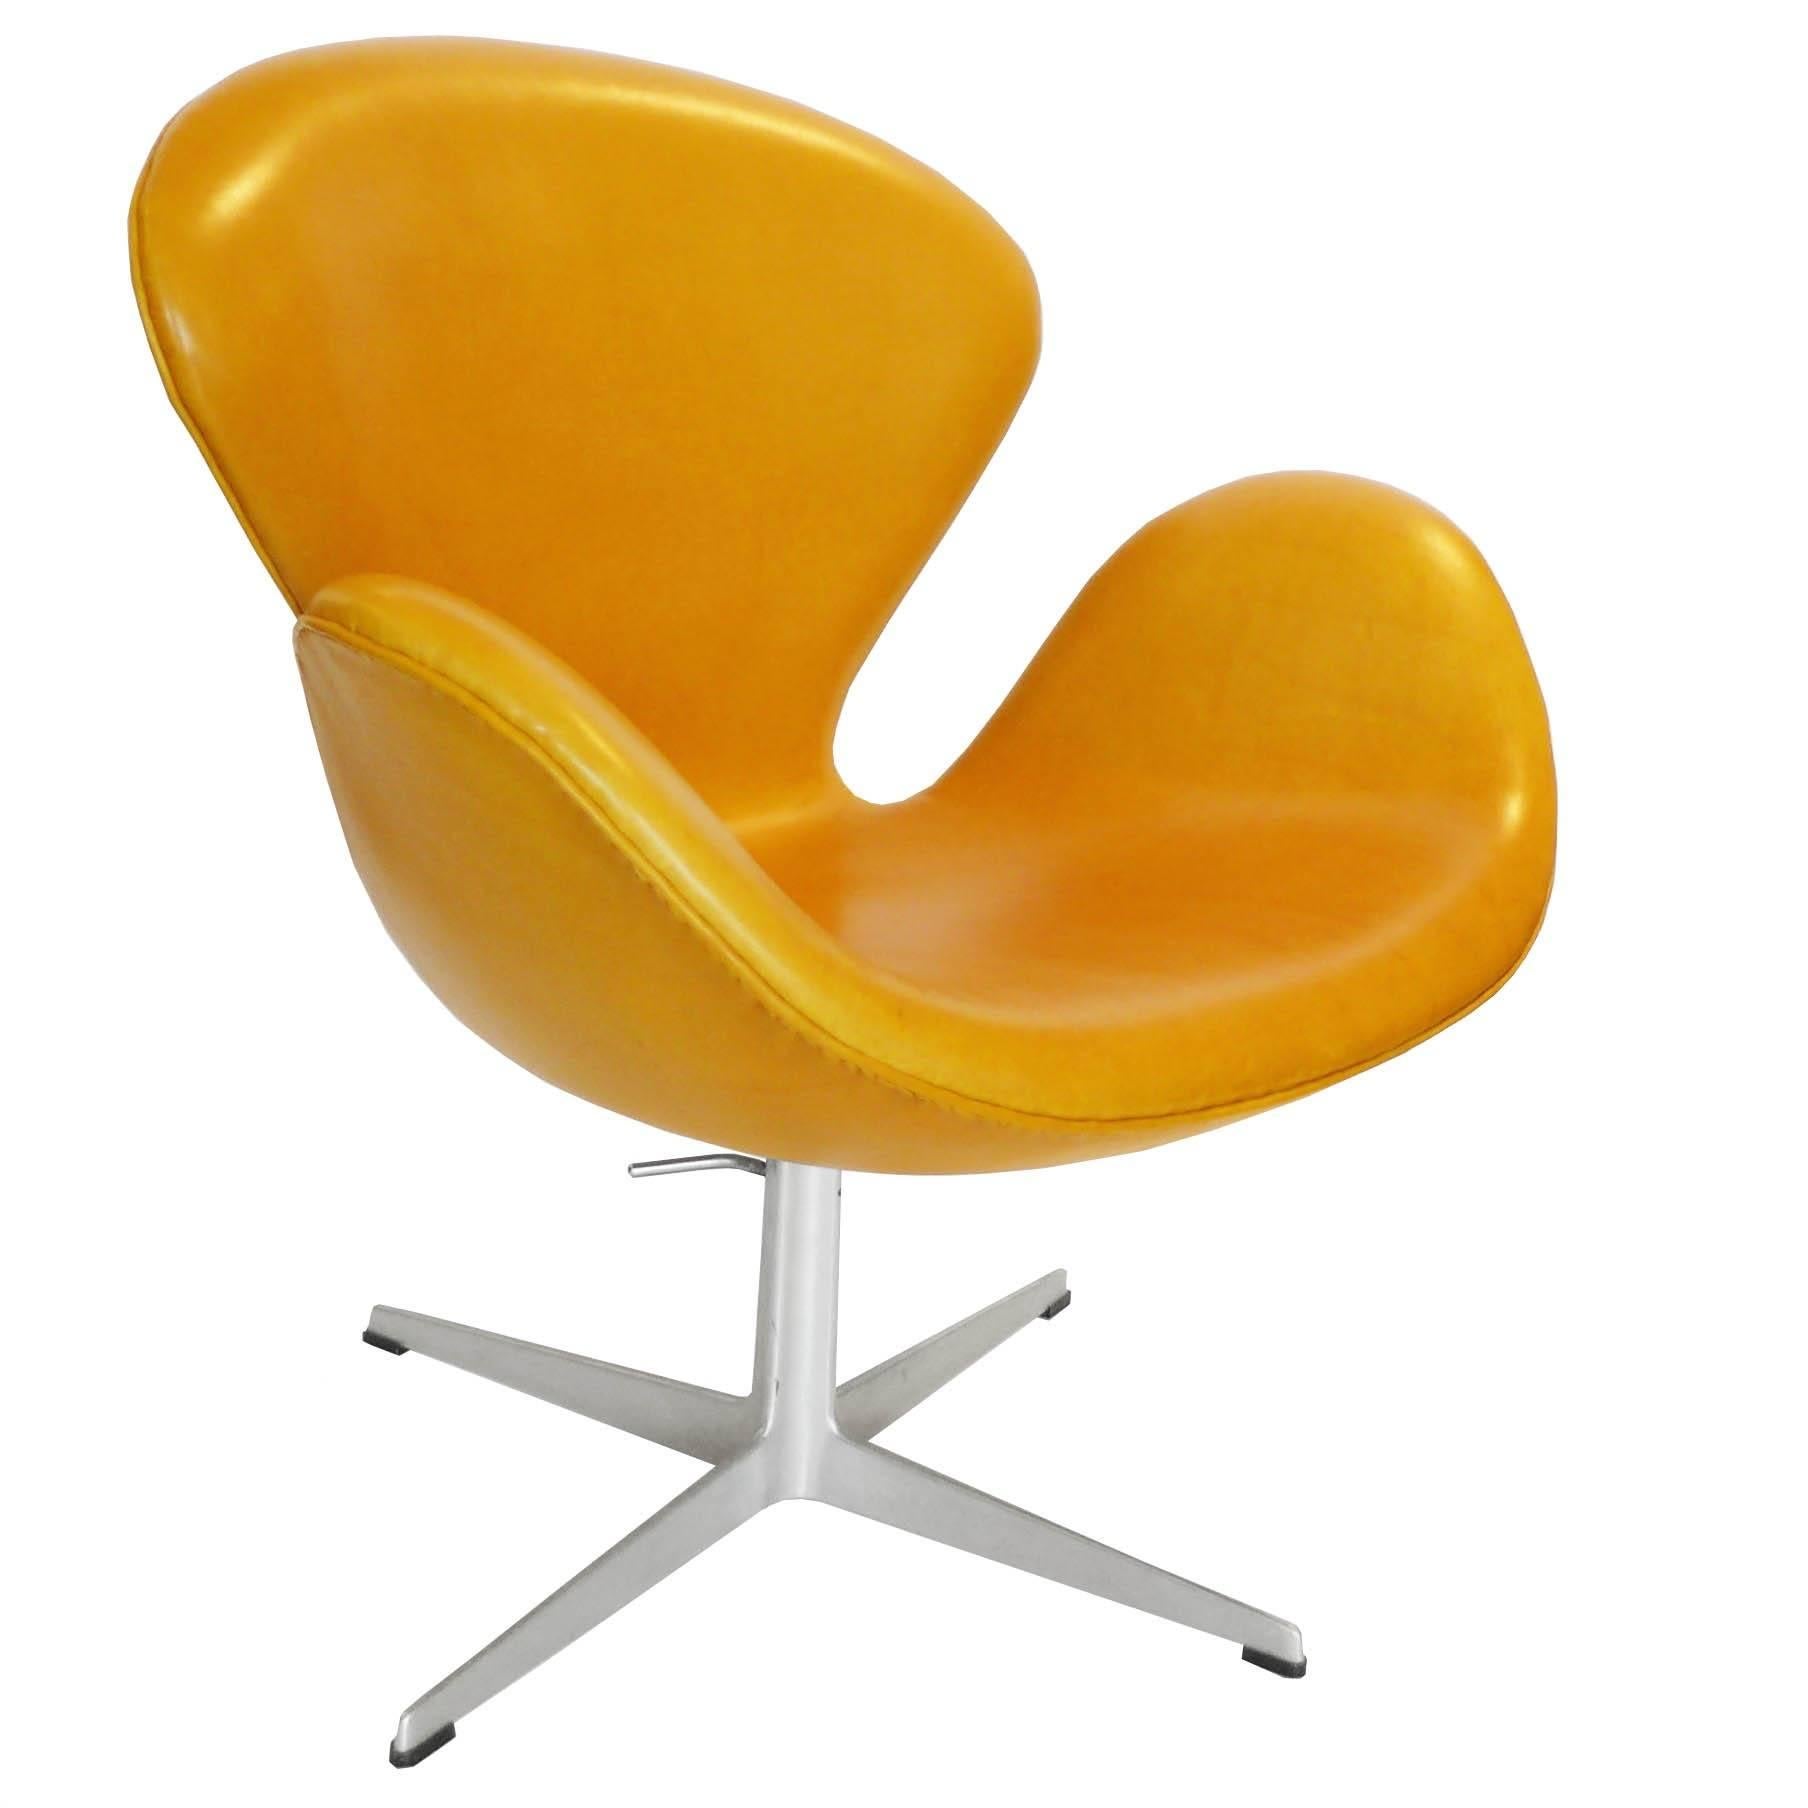 Early Rare Adjustable Swan Chair by Arne Jacobsen in Golden Tan Leather For Sale